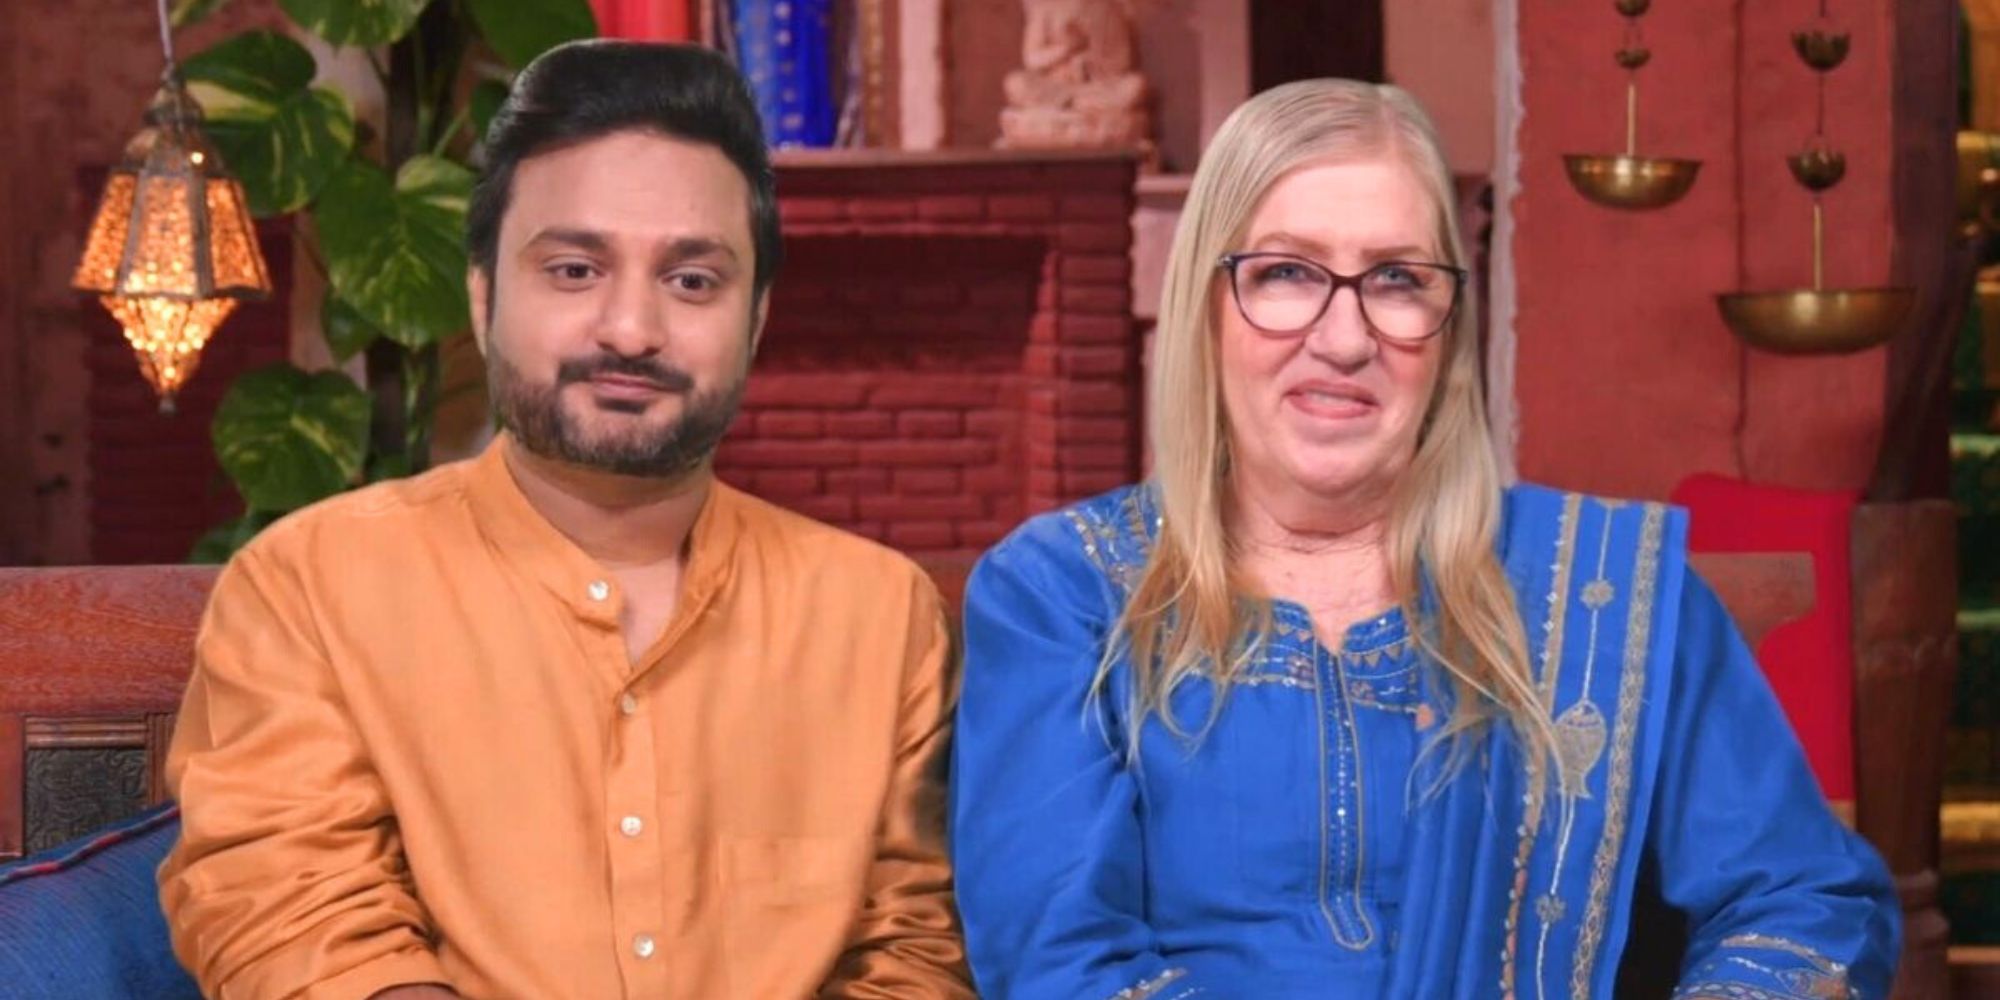 90 Day Fiance's Jenny Slatten and Sumit Singh during interview